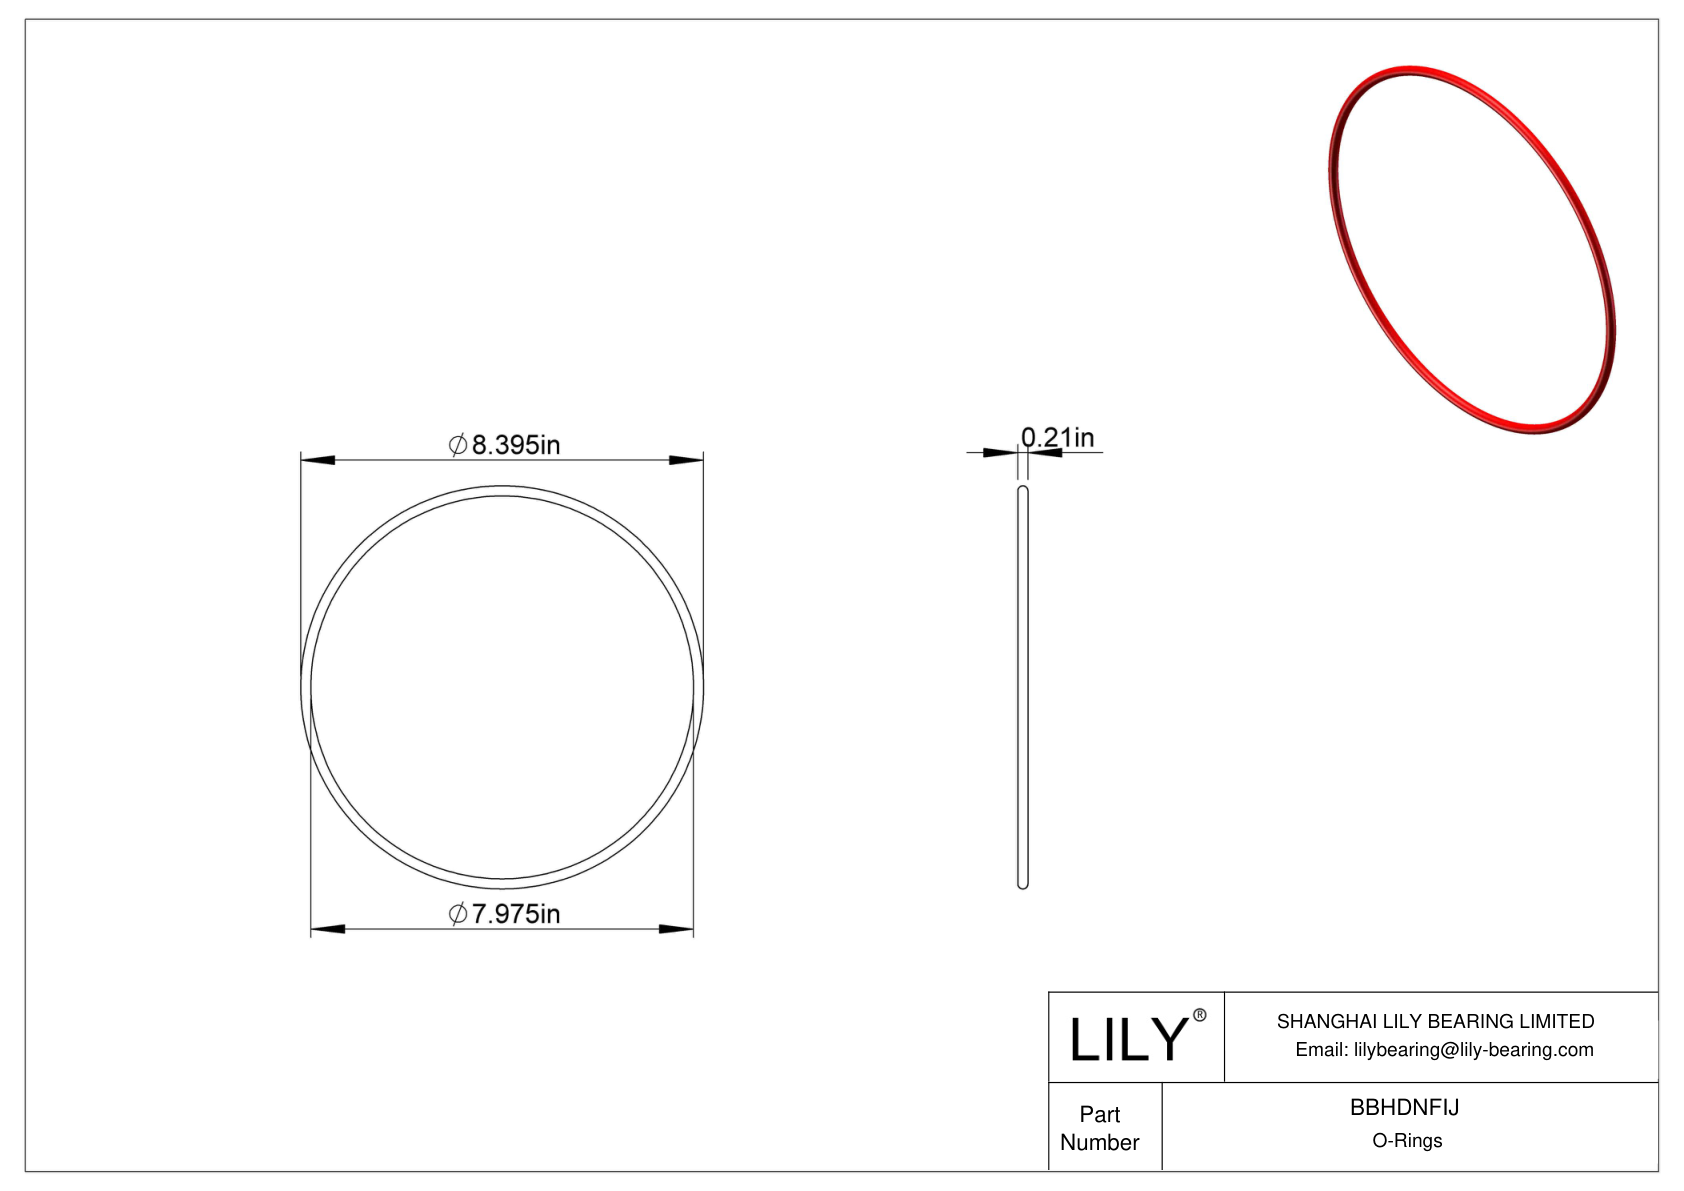 BBHDNFIJ High Temperature O-Rings Round cad drawing